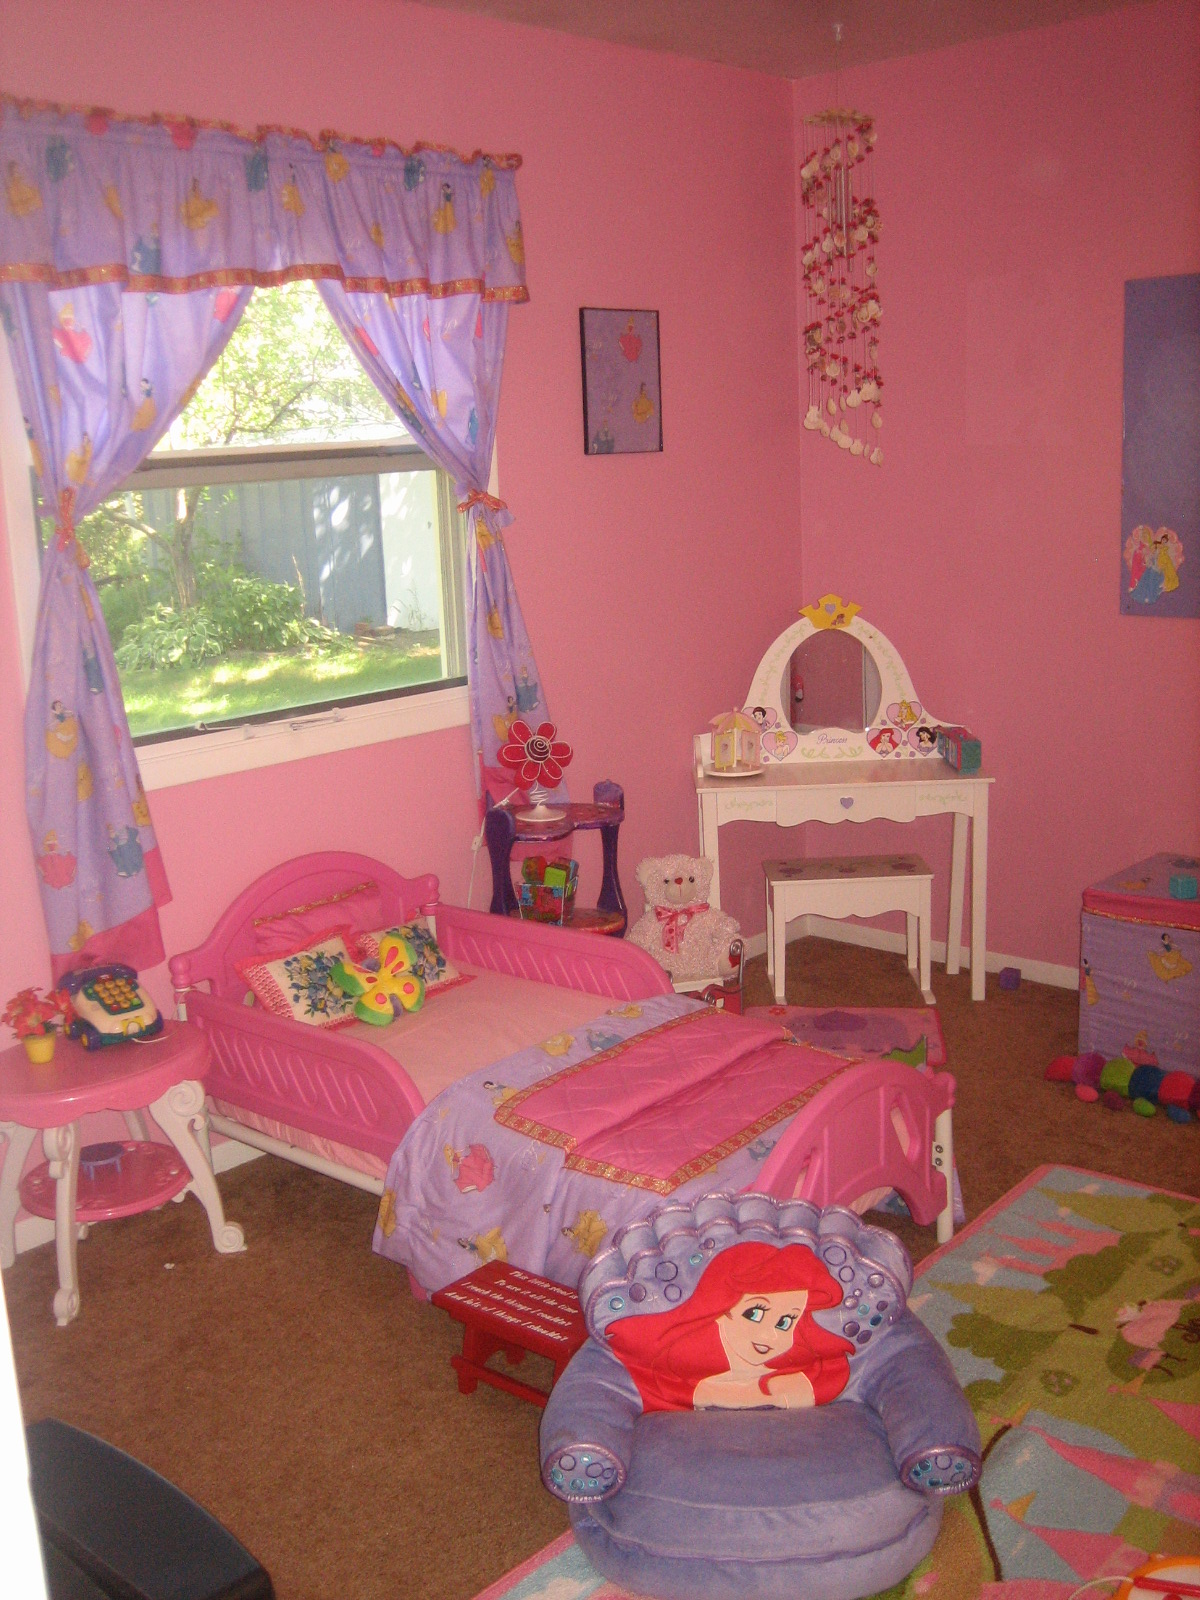 Gorgeous bedroom ideas for girl kids excellent choice of colors and furnishing ideas